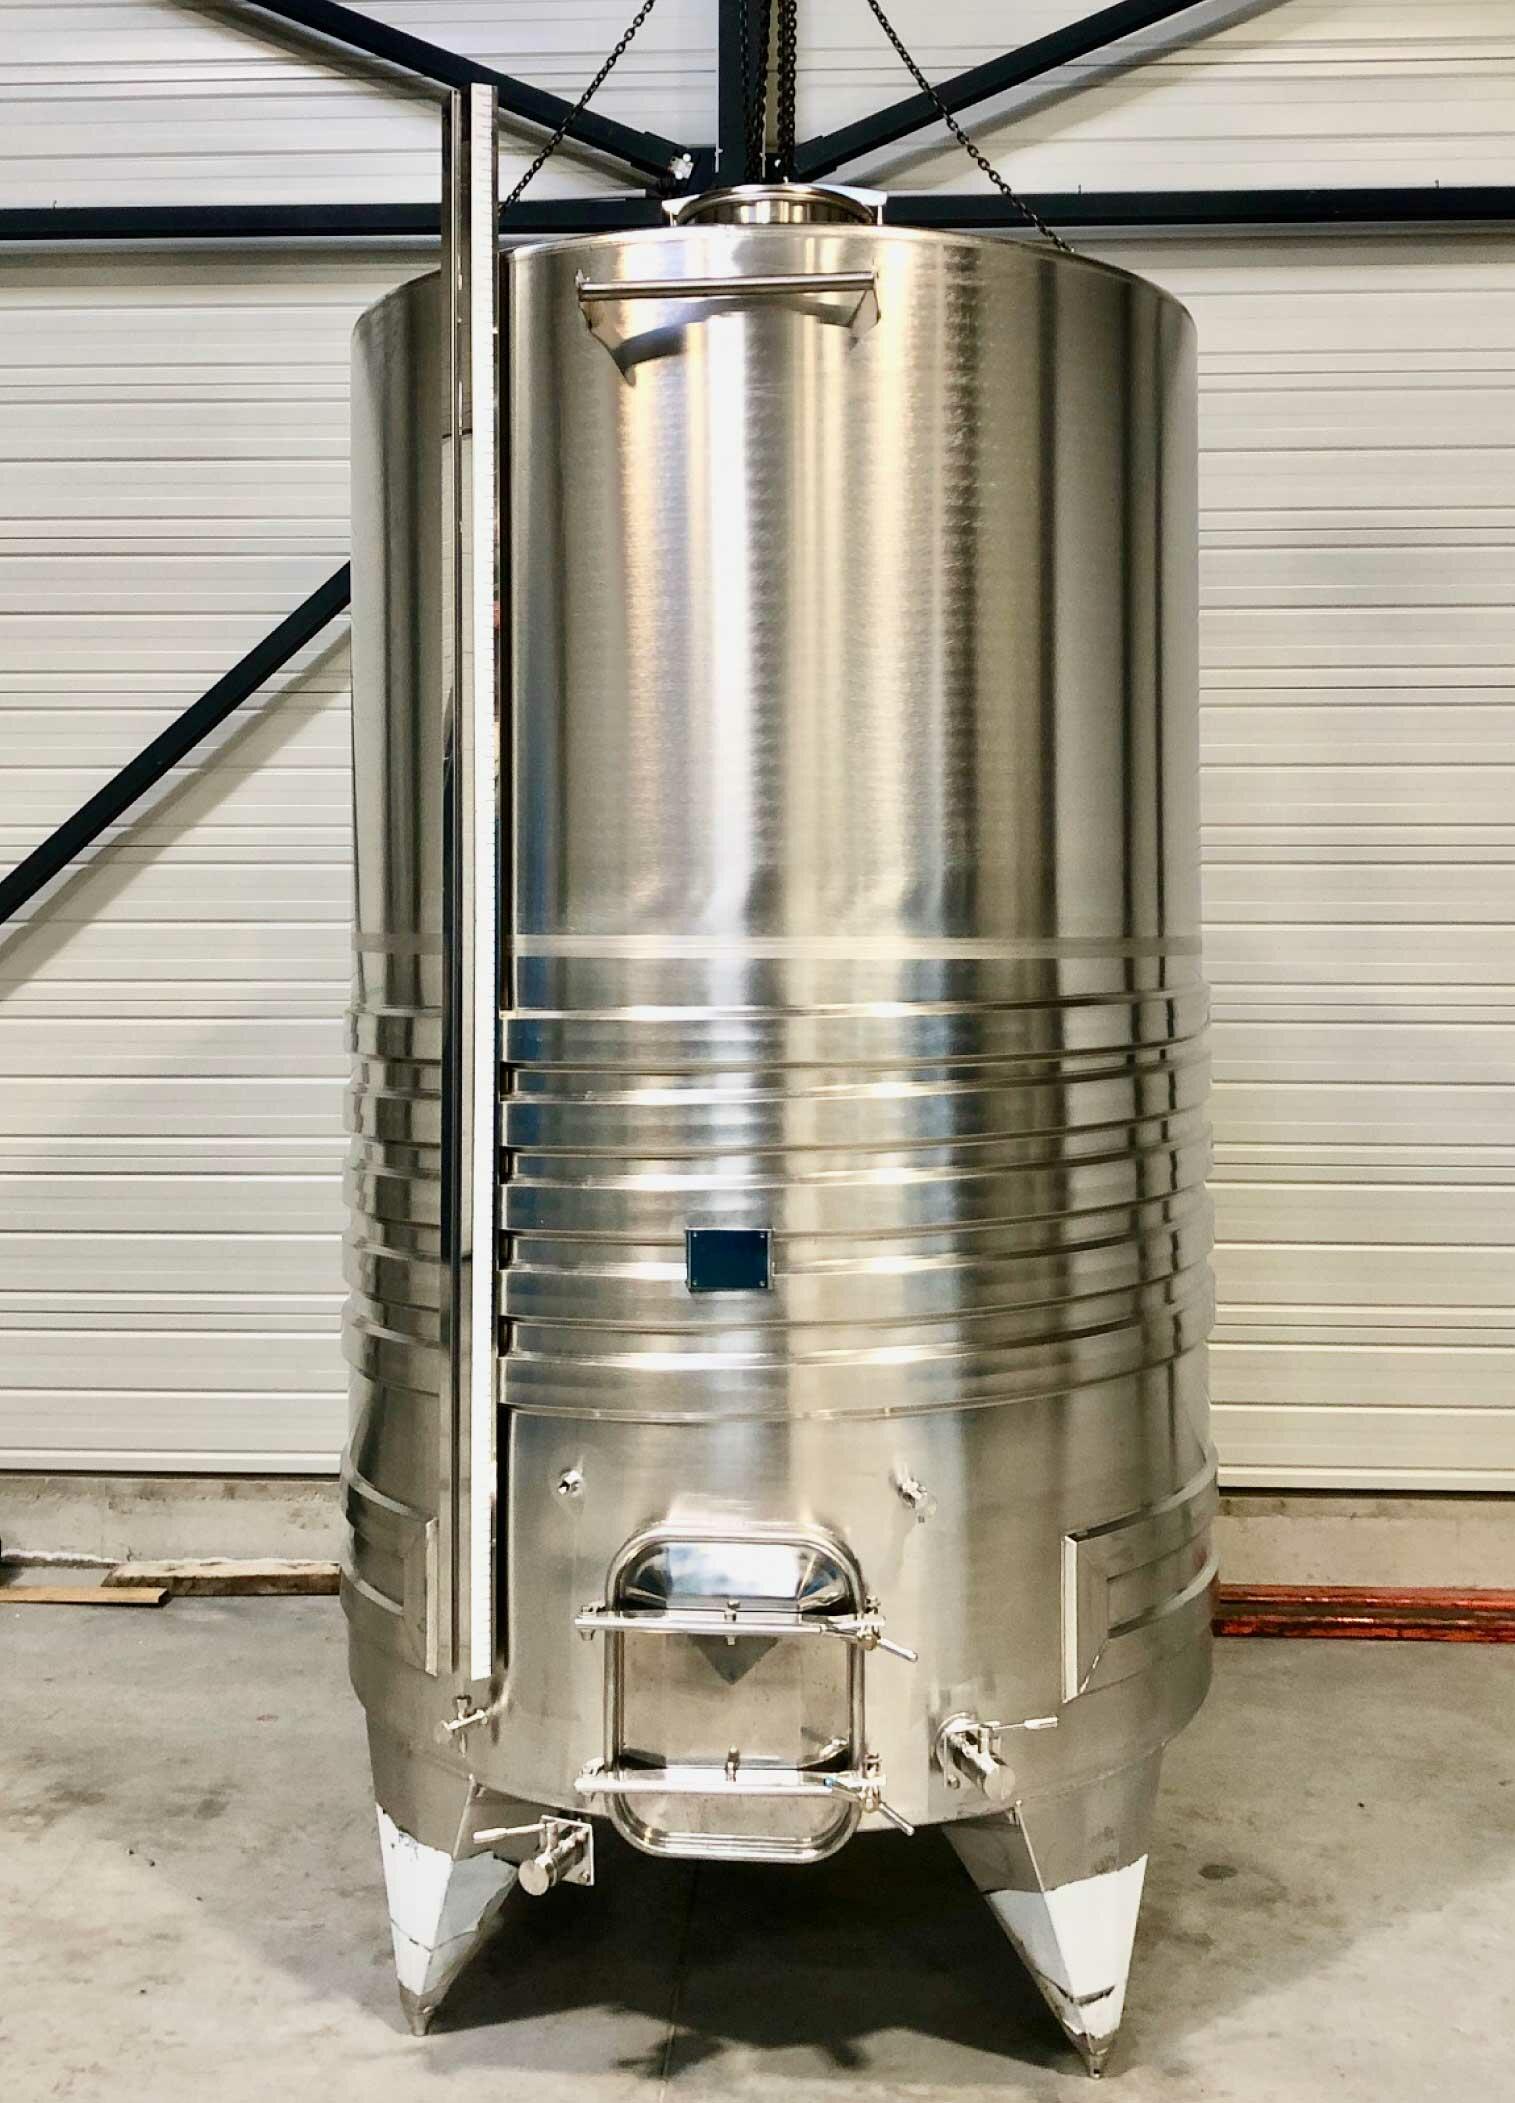 304 stainless steel tank - Closed - STOIPSER7500